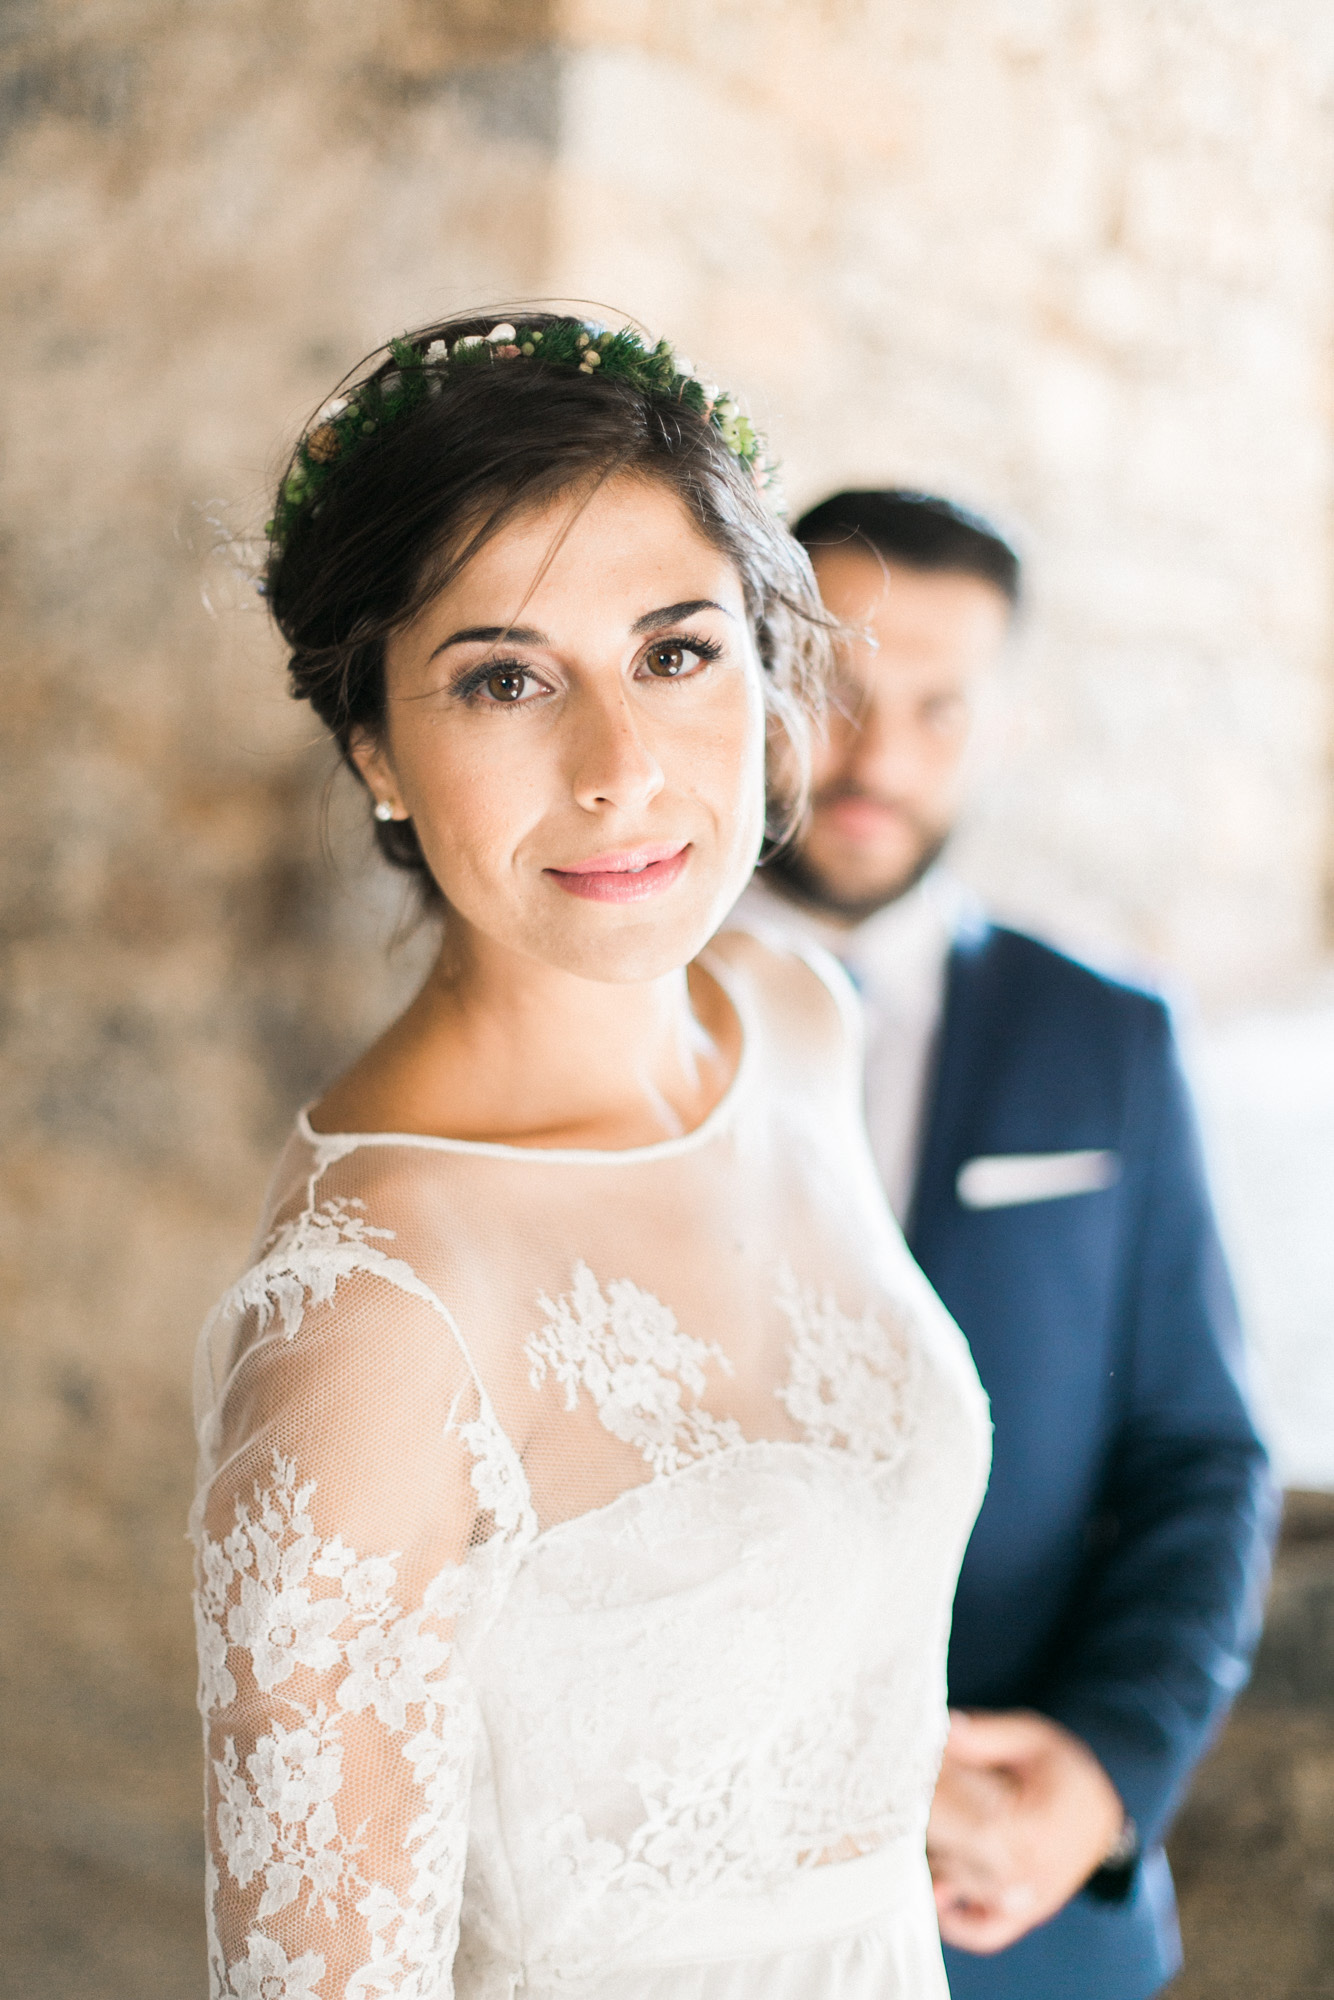 Professional wedding photoshoot in Crete, bride posing with groom with Spinalonga island historical ruins in the background.